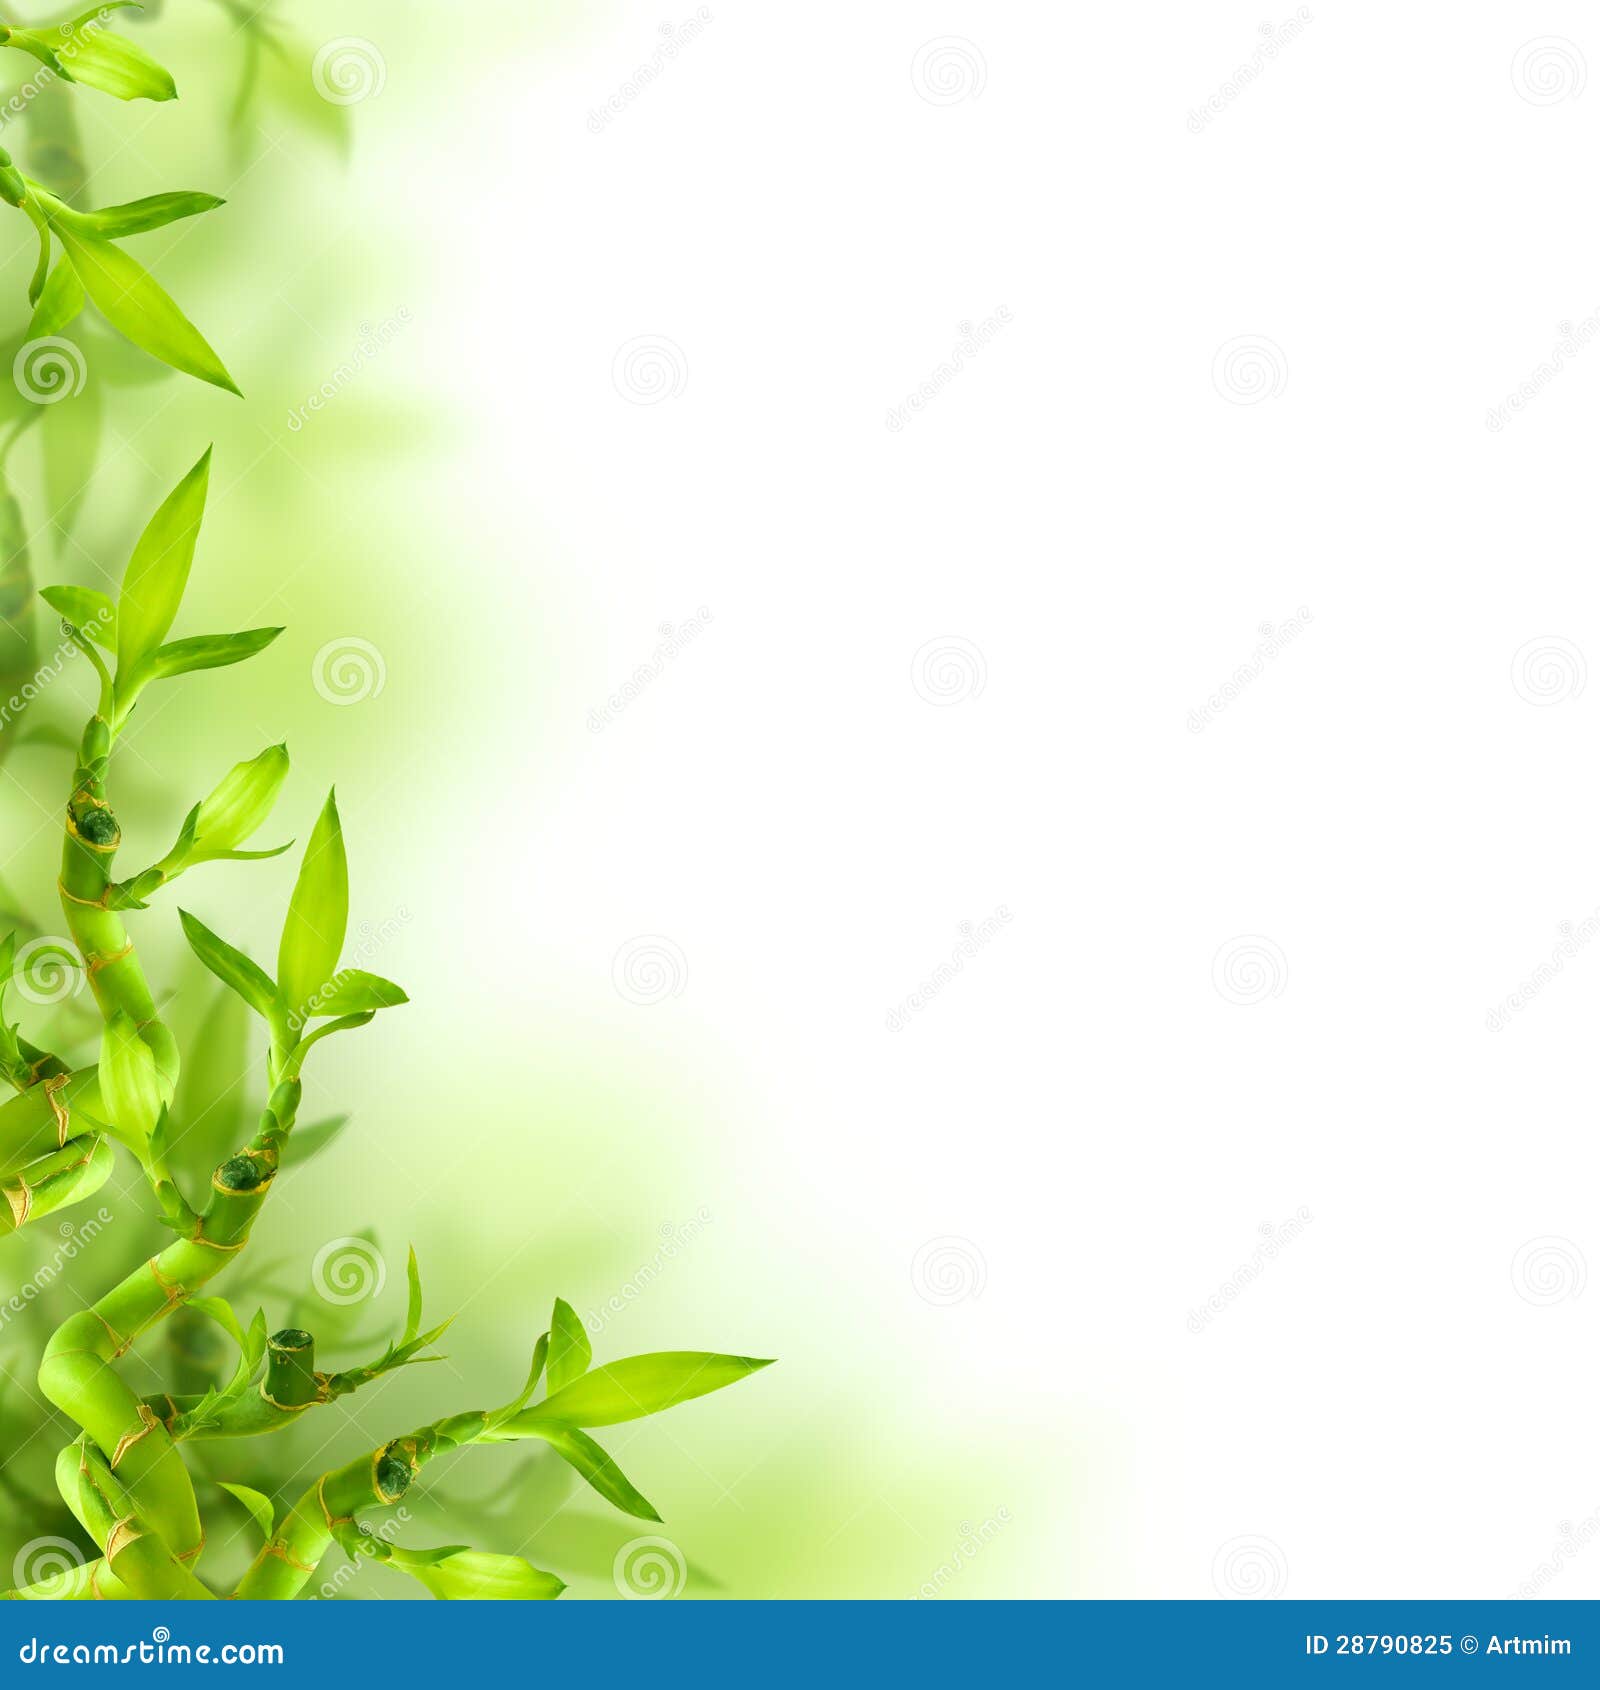 Bamboo and Green Leaves, Background Stock Image - Image of east, concepts:  28790825